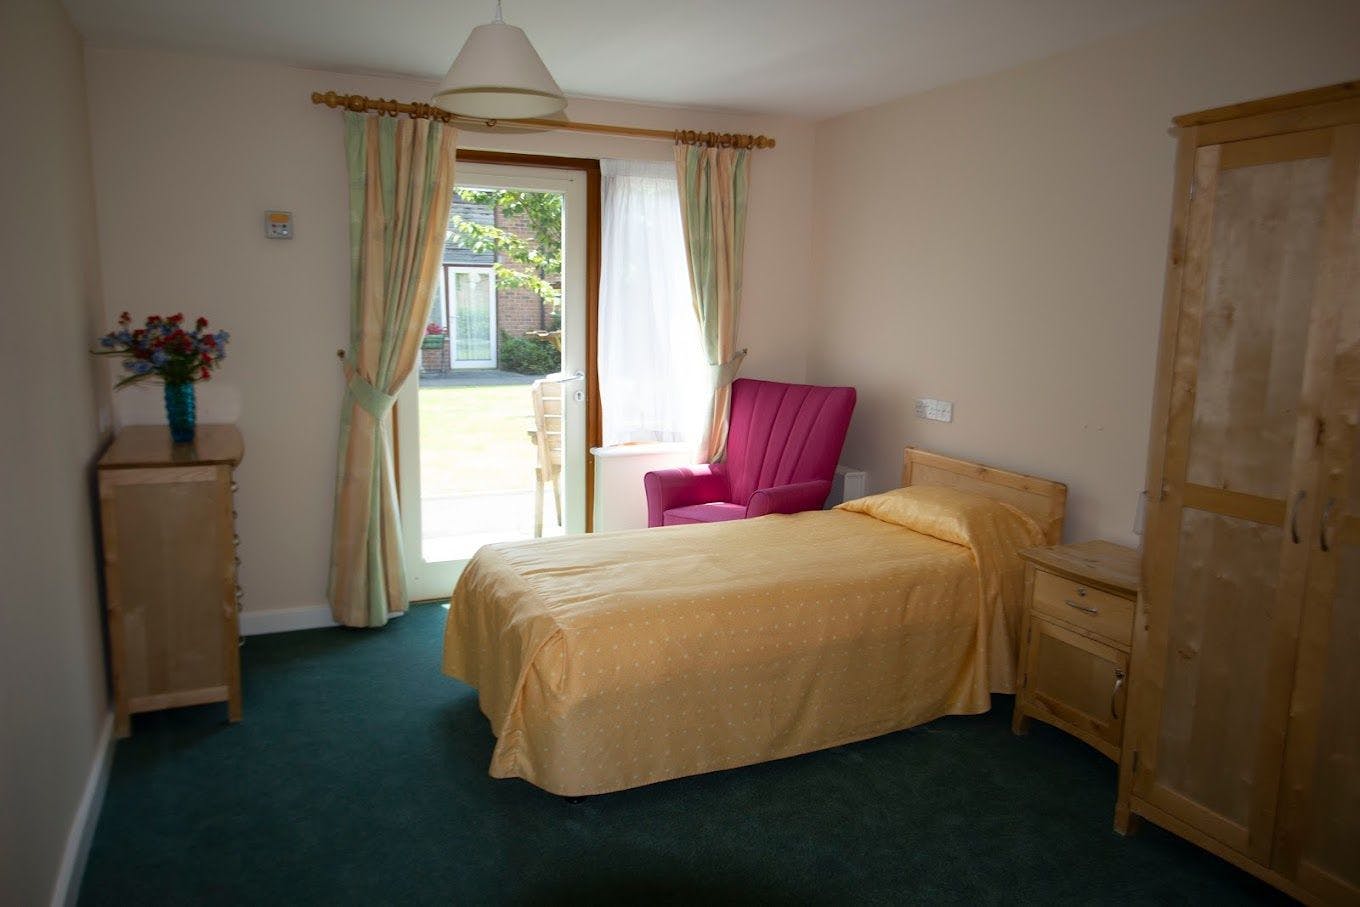 Shaw Healthcare - Rotherlea care home 004